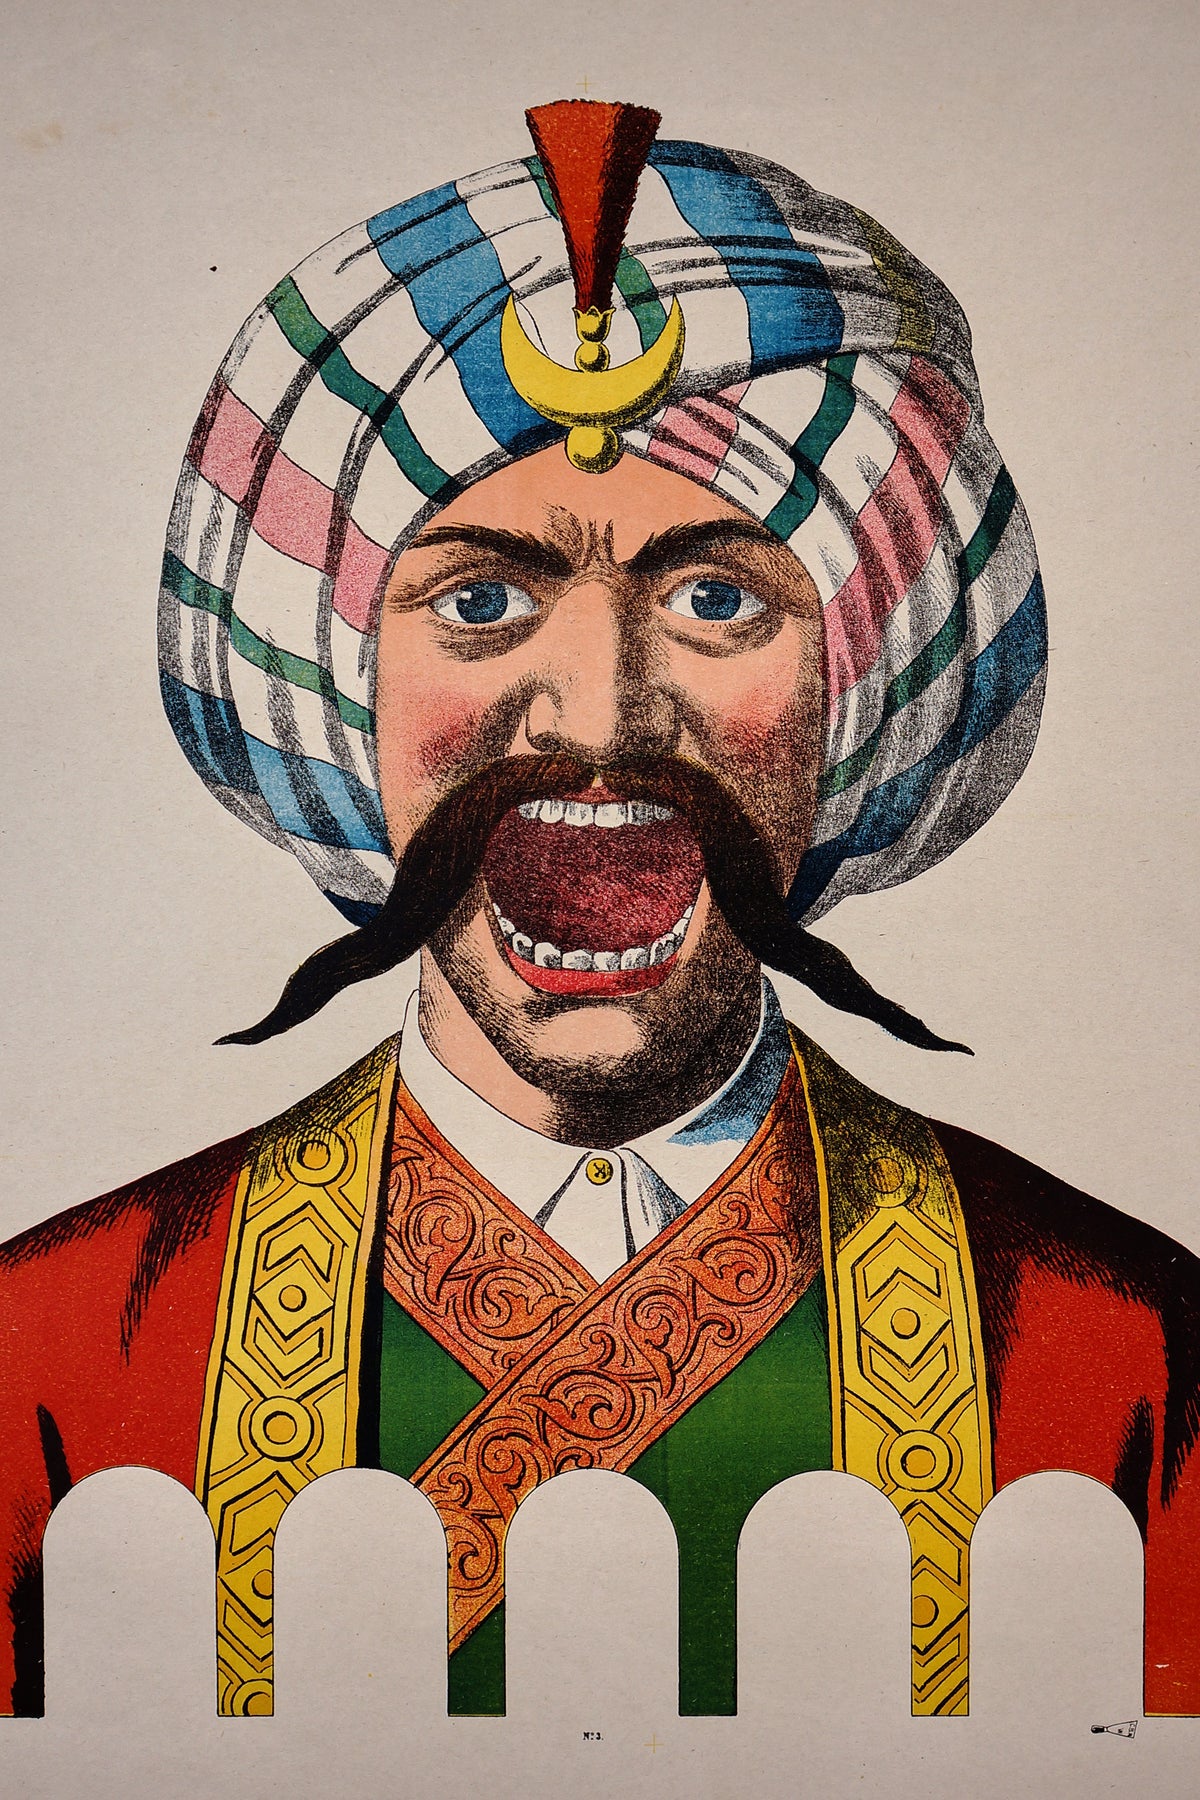 Wissembourg- Man with Turban No. 3 - Authentic Vintage Poster